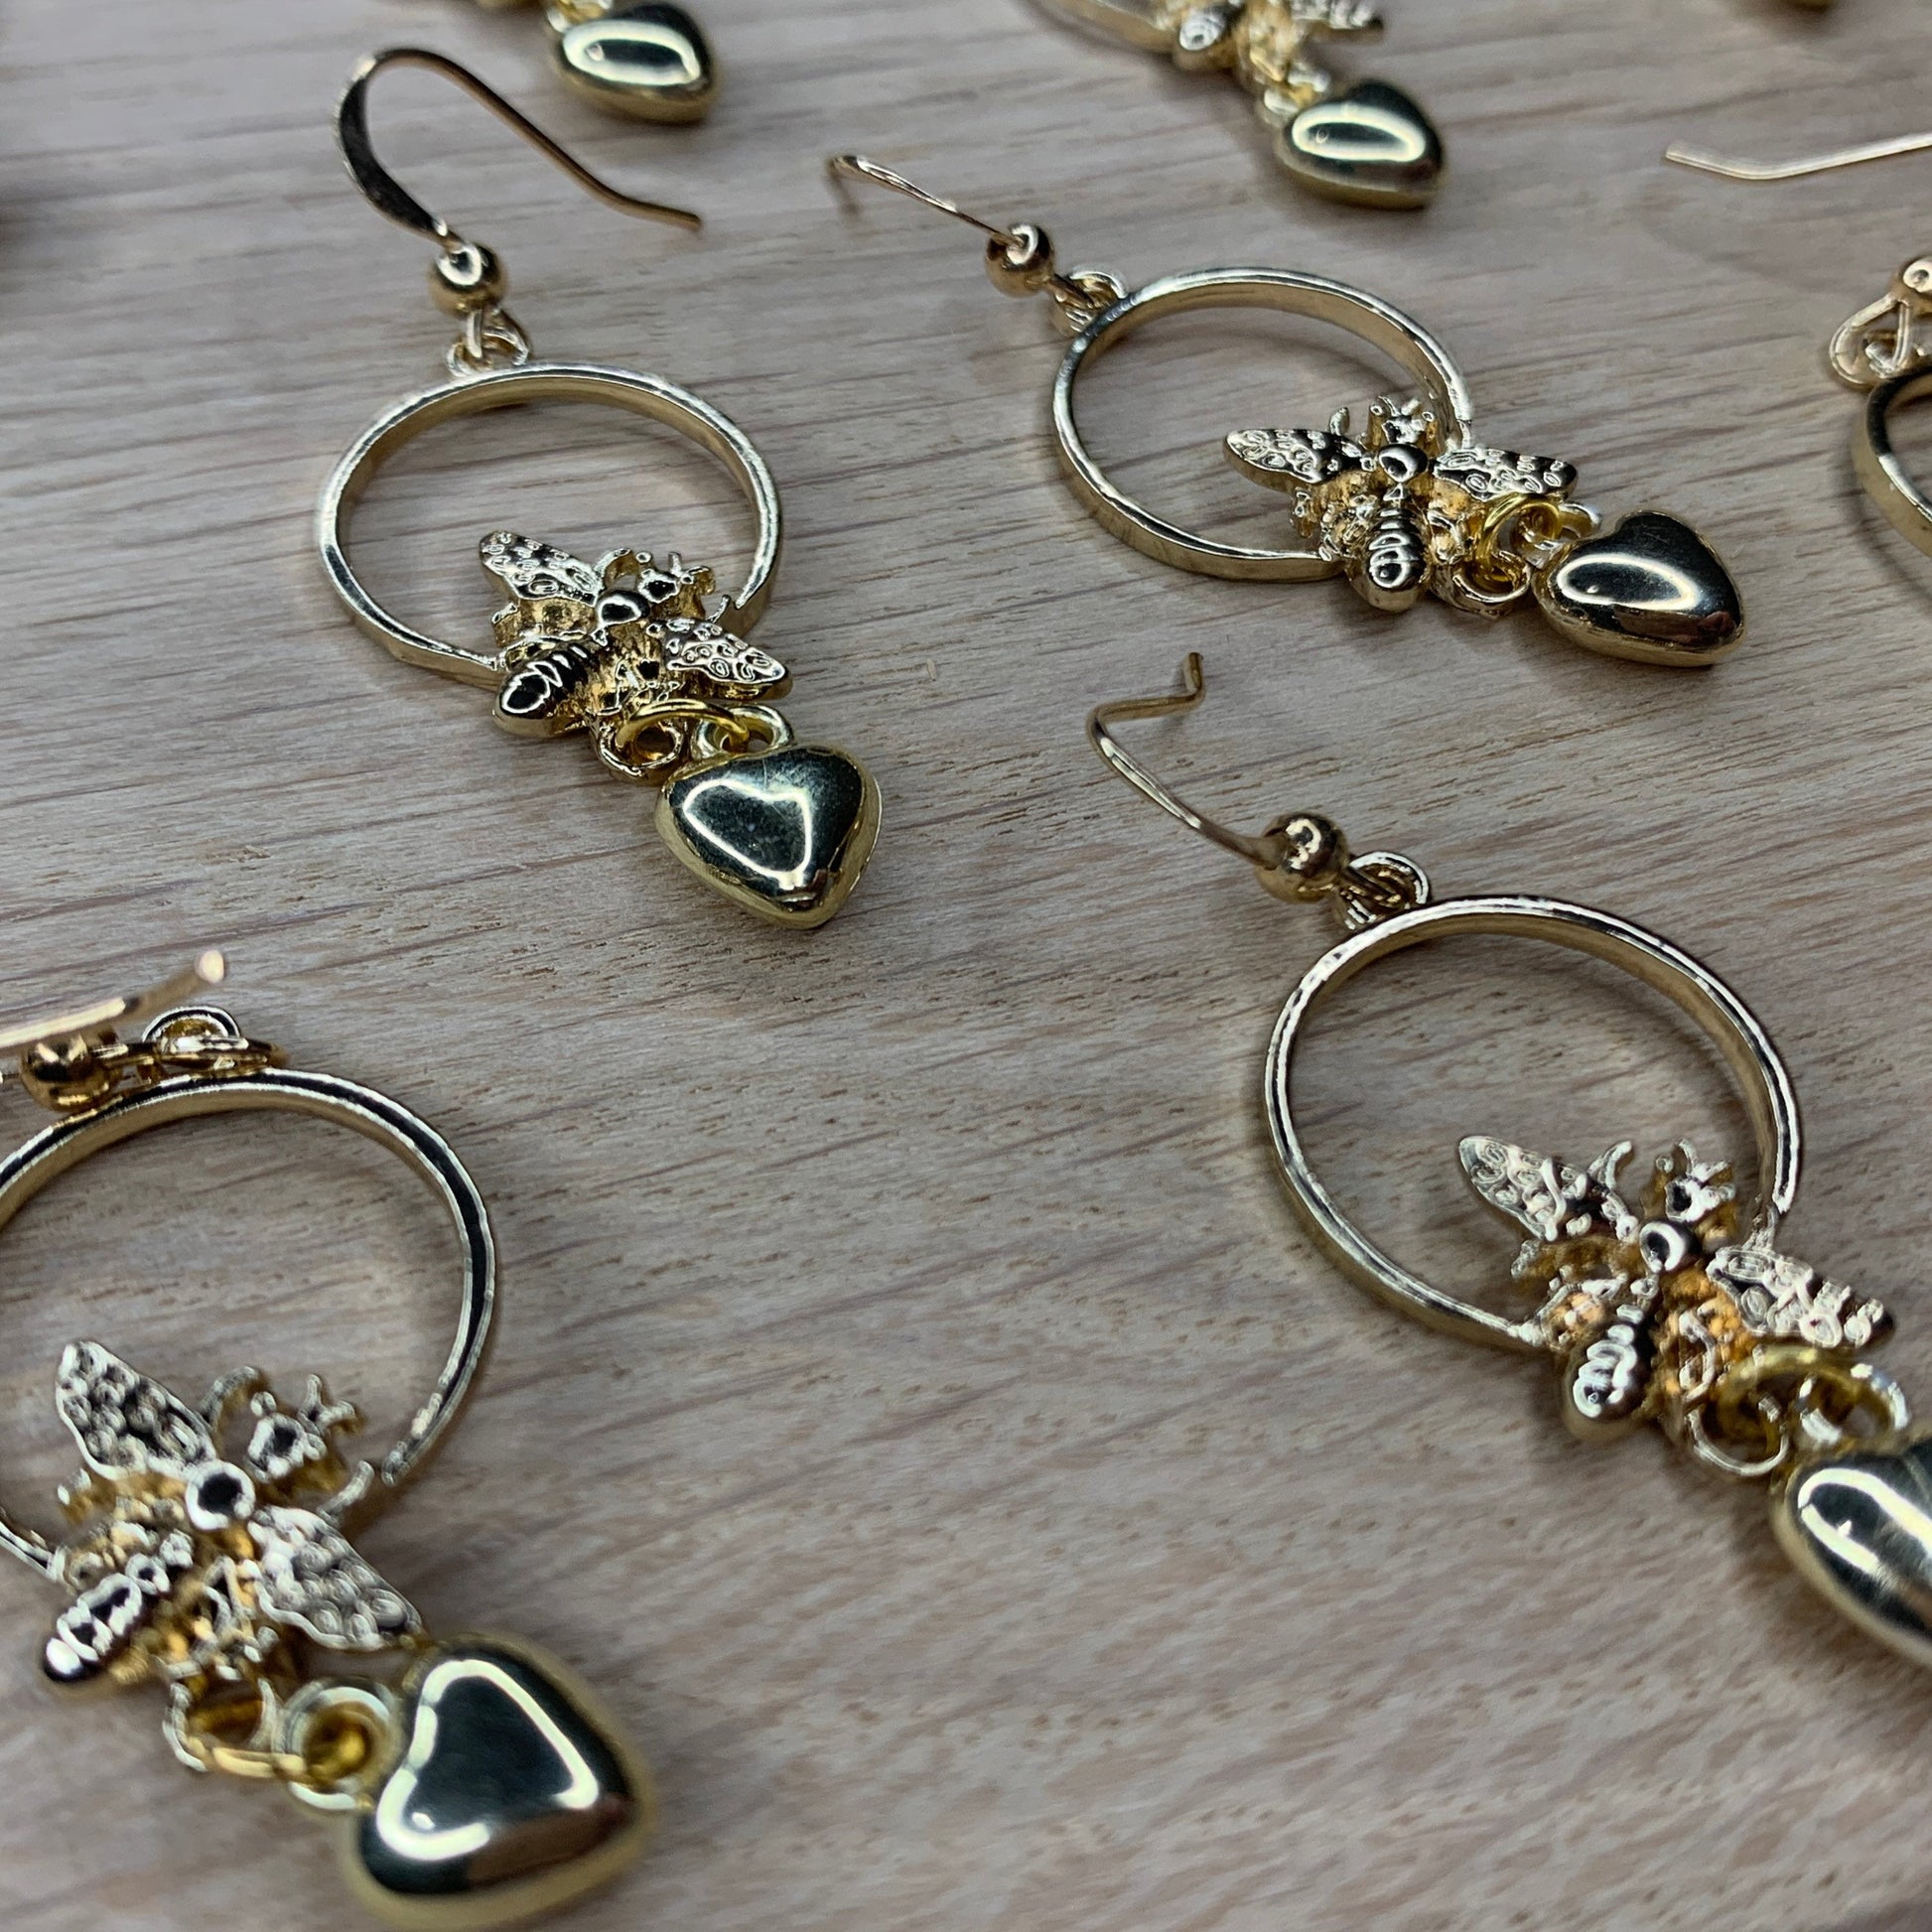 Gold Bee Dangle Drop Earrings with Heart Charm - Lxyclr Authentic